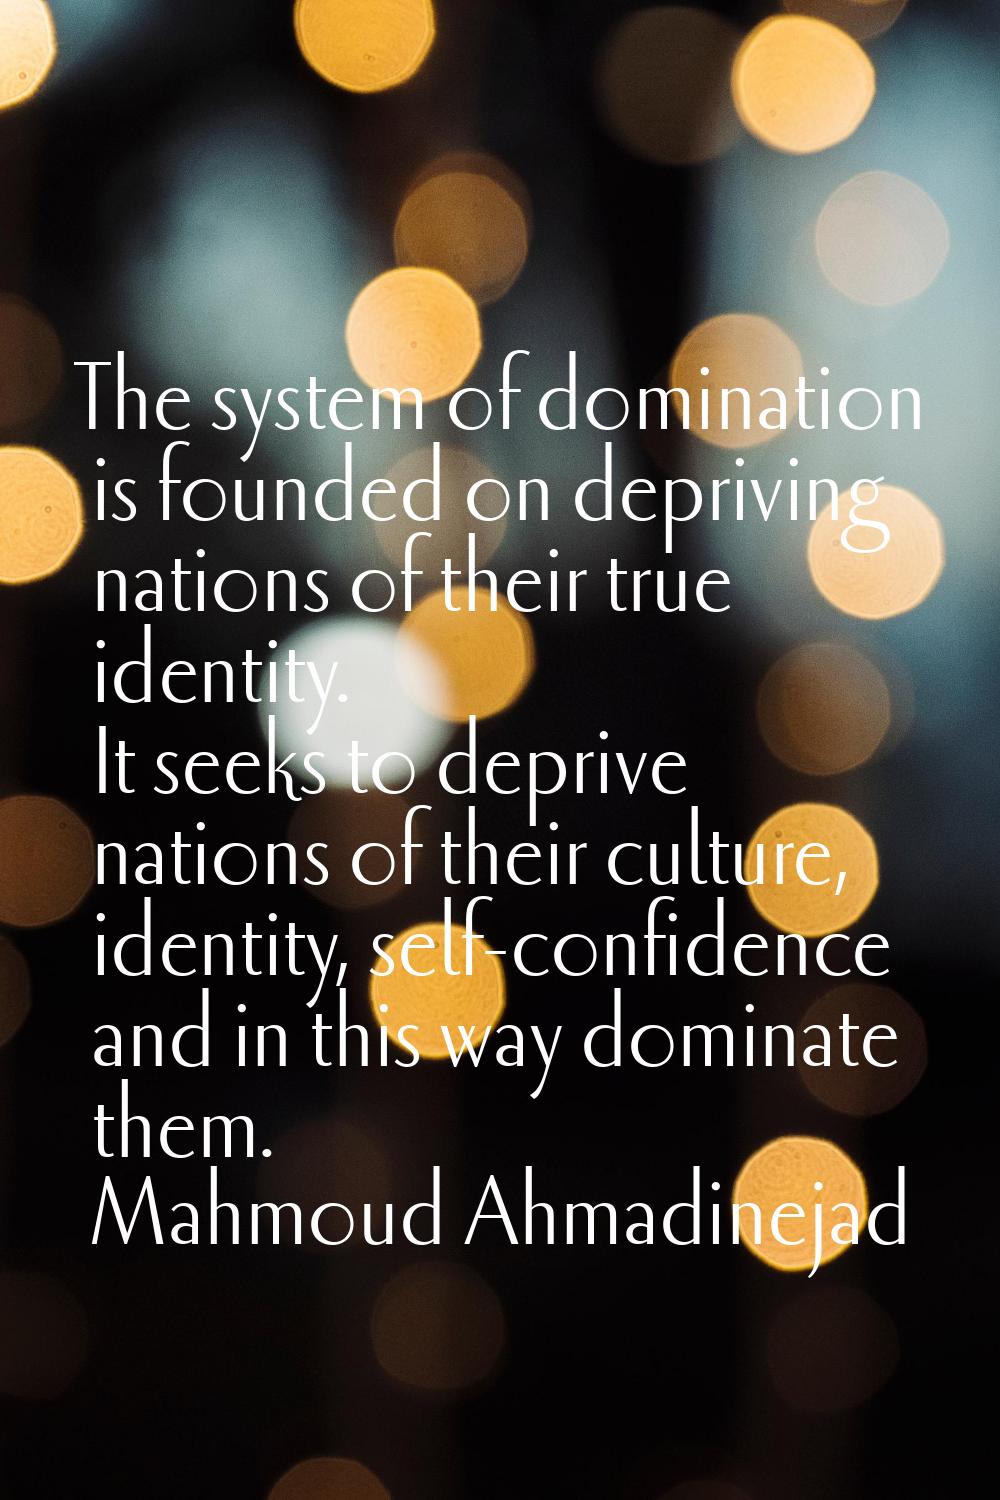 The system of domination is founded on depriving nations of their true identity. It seeks to depriv